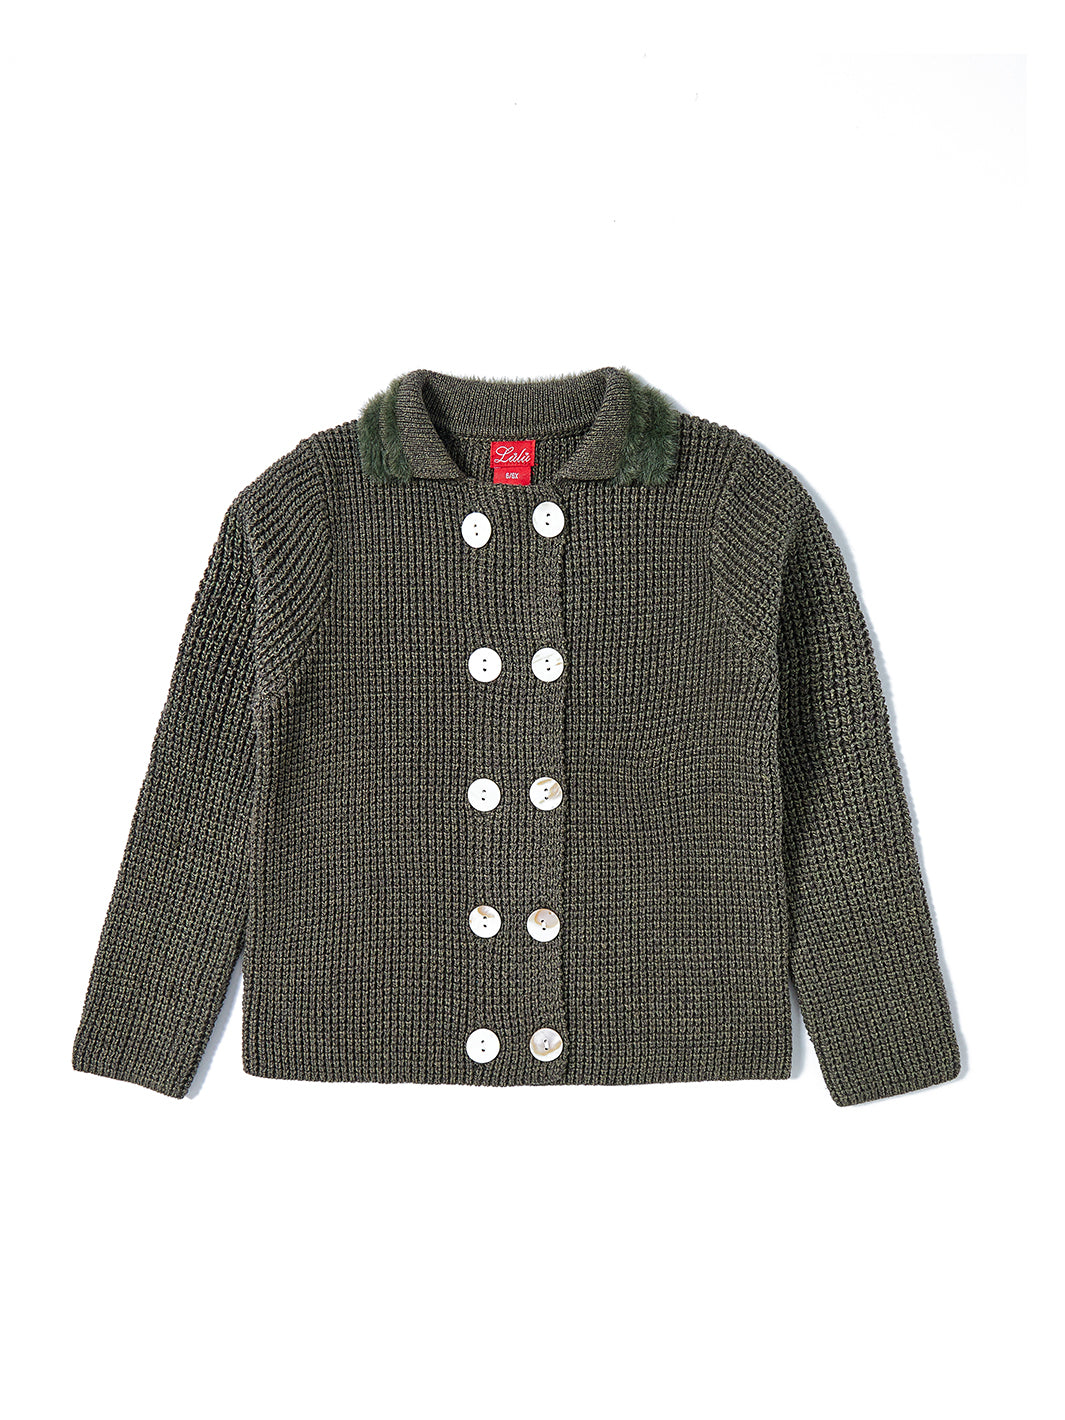 Double Breasted Blazer Style Sweater - Olive